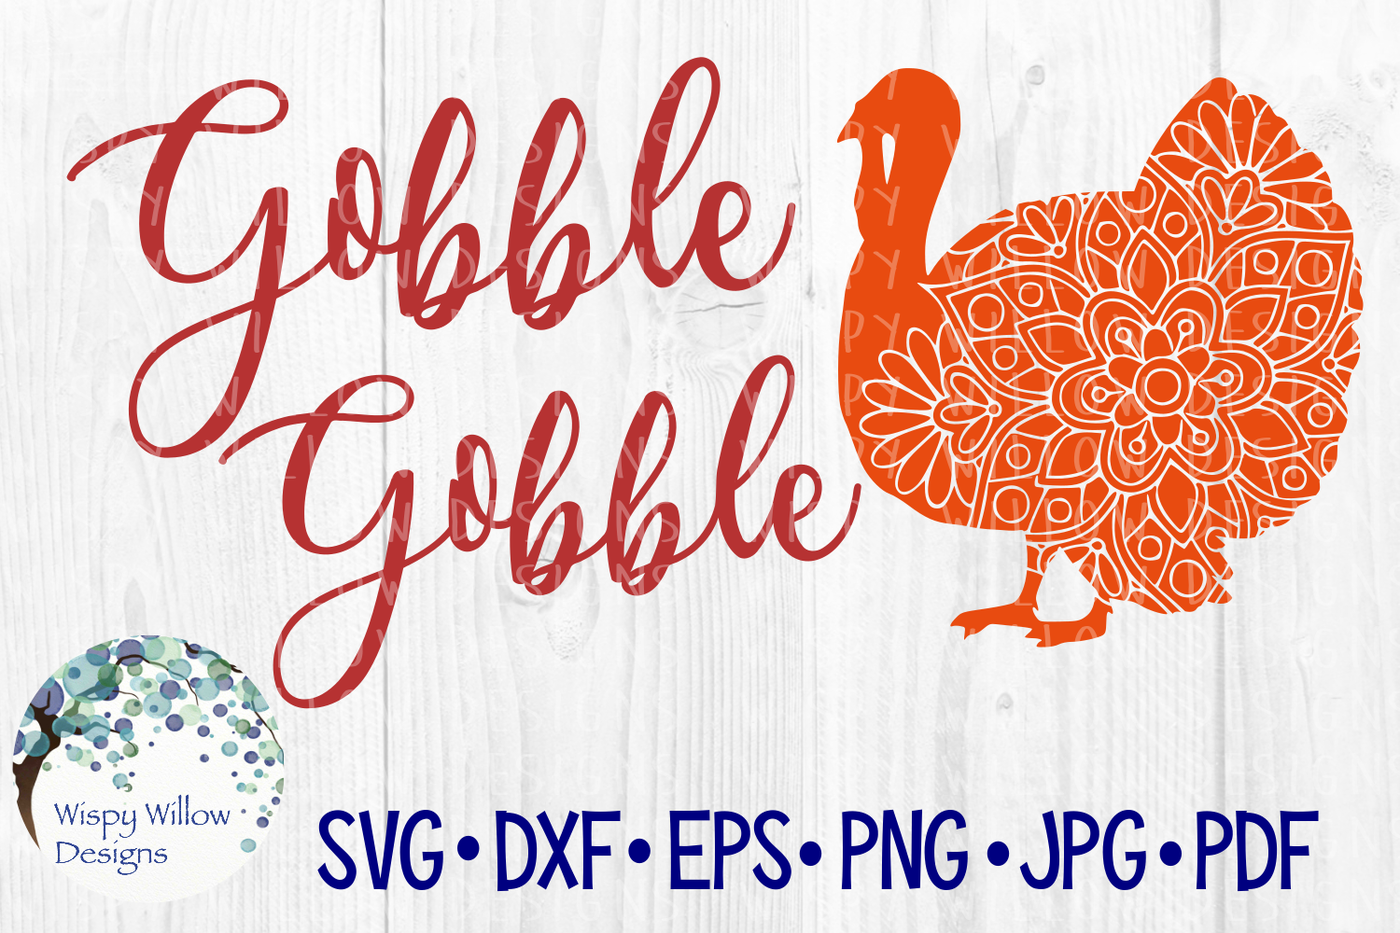 Download Gobble Gobble Mandala Turkey Thanksgiving Svg Dxf Eps Png Jpg Pdf By Wispy Willow Designs Thehungryjpeg Com Yellowimages Mockups